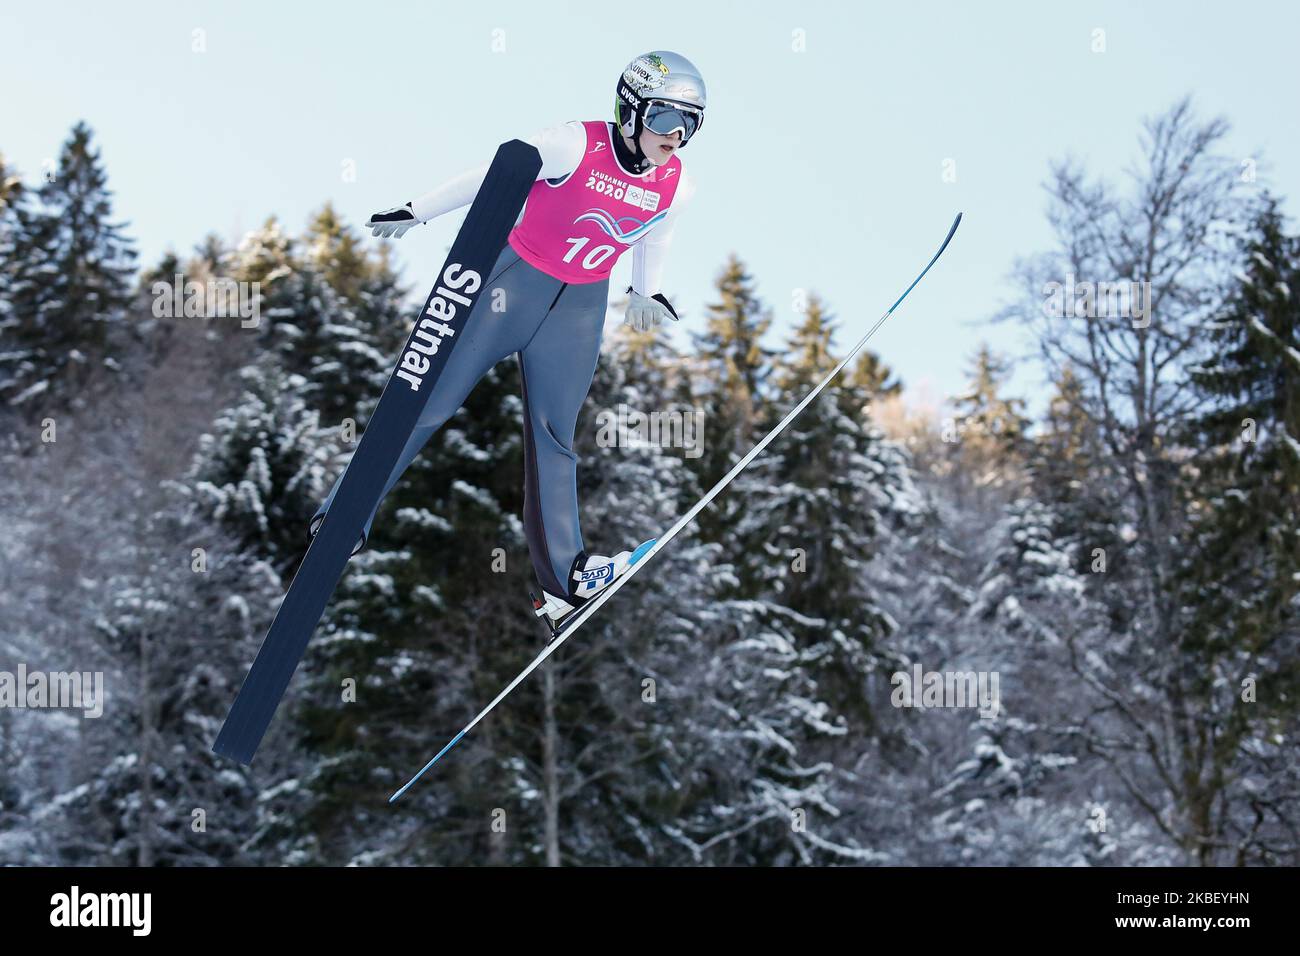 MAZI Pia from Slovenia competes in Ski Jumping: Women's Individual Competition on 10. day of Winter Youth Olympic Games Lausanne 2020 in Les Tuffes Nordic Centre, France on January 19, 2020. (Photo by Dominika Zarzycka/NurPhoto) Stock Photo